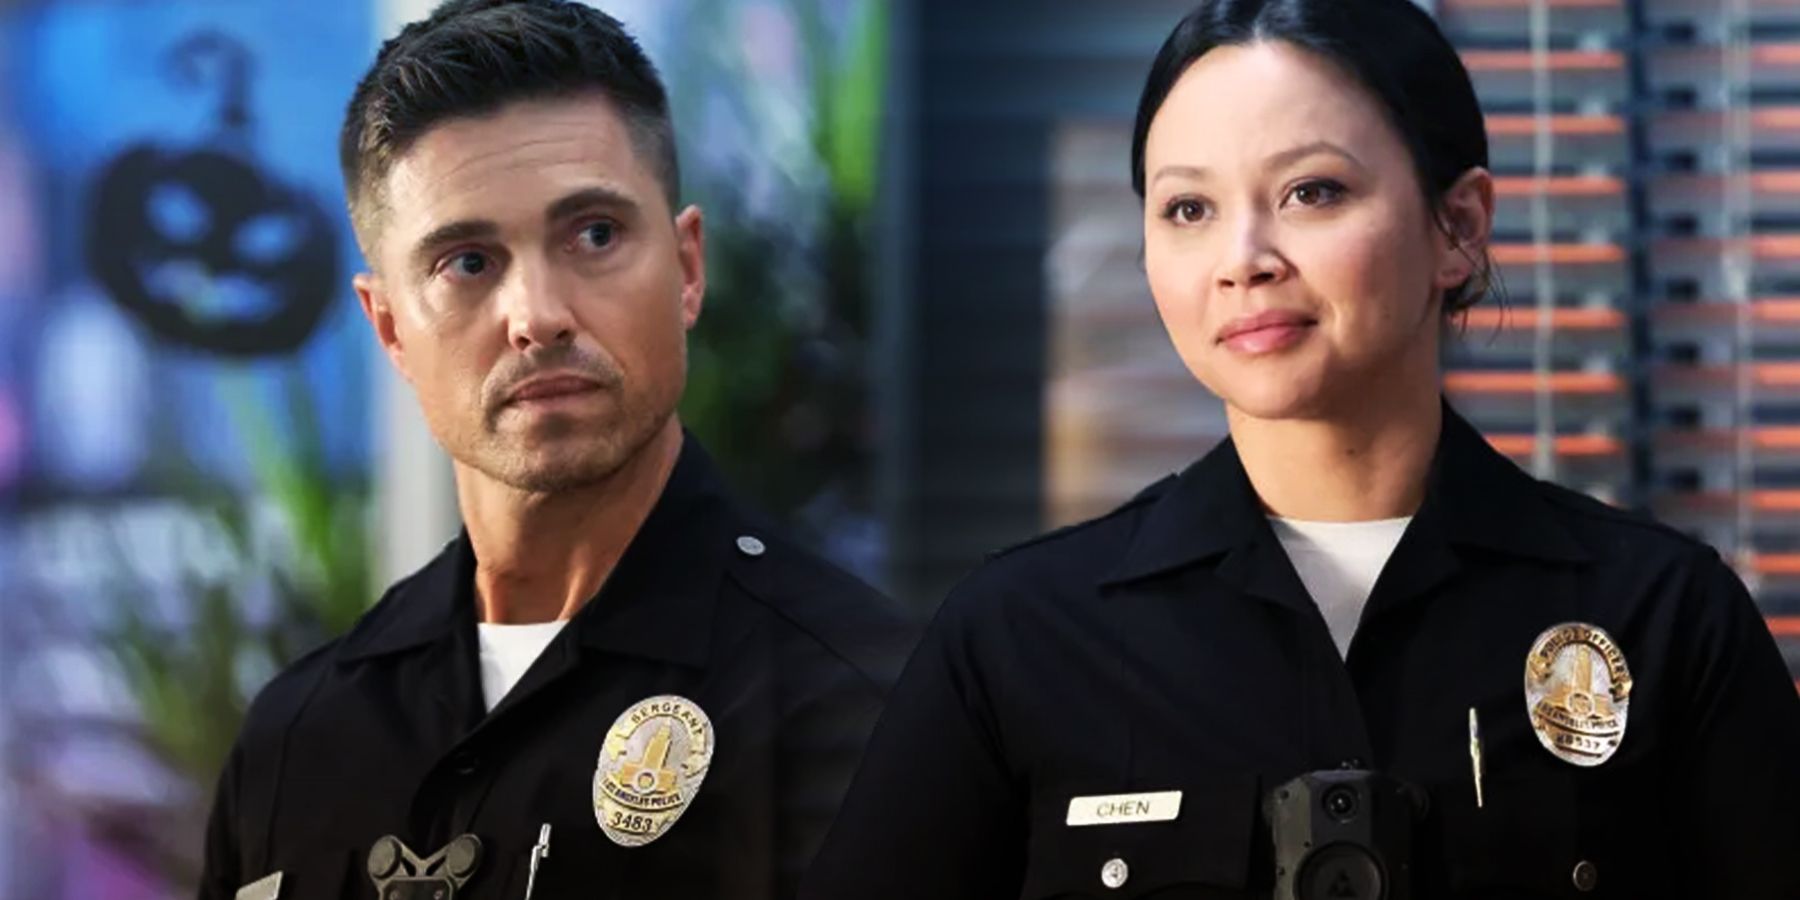 From left to right: Tim Bradford and Lucy Chen of 'The Rookie'.